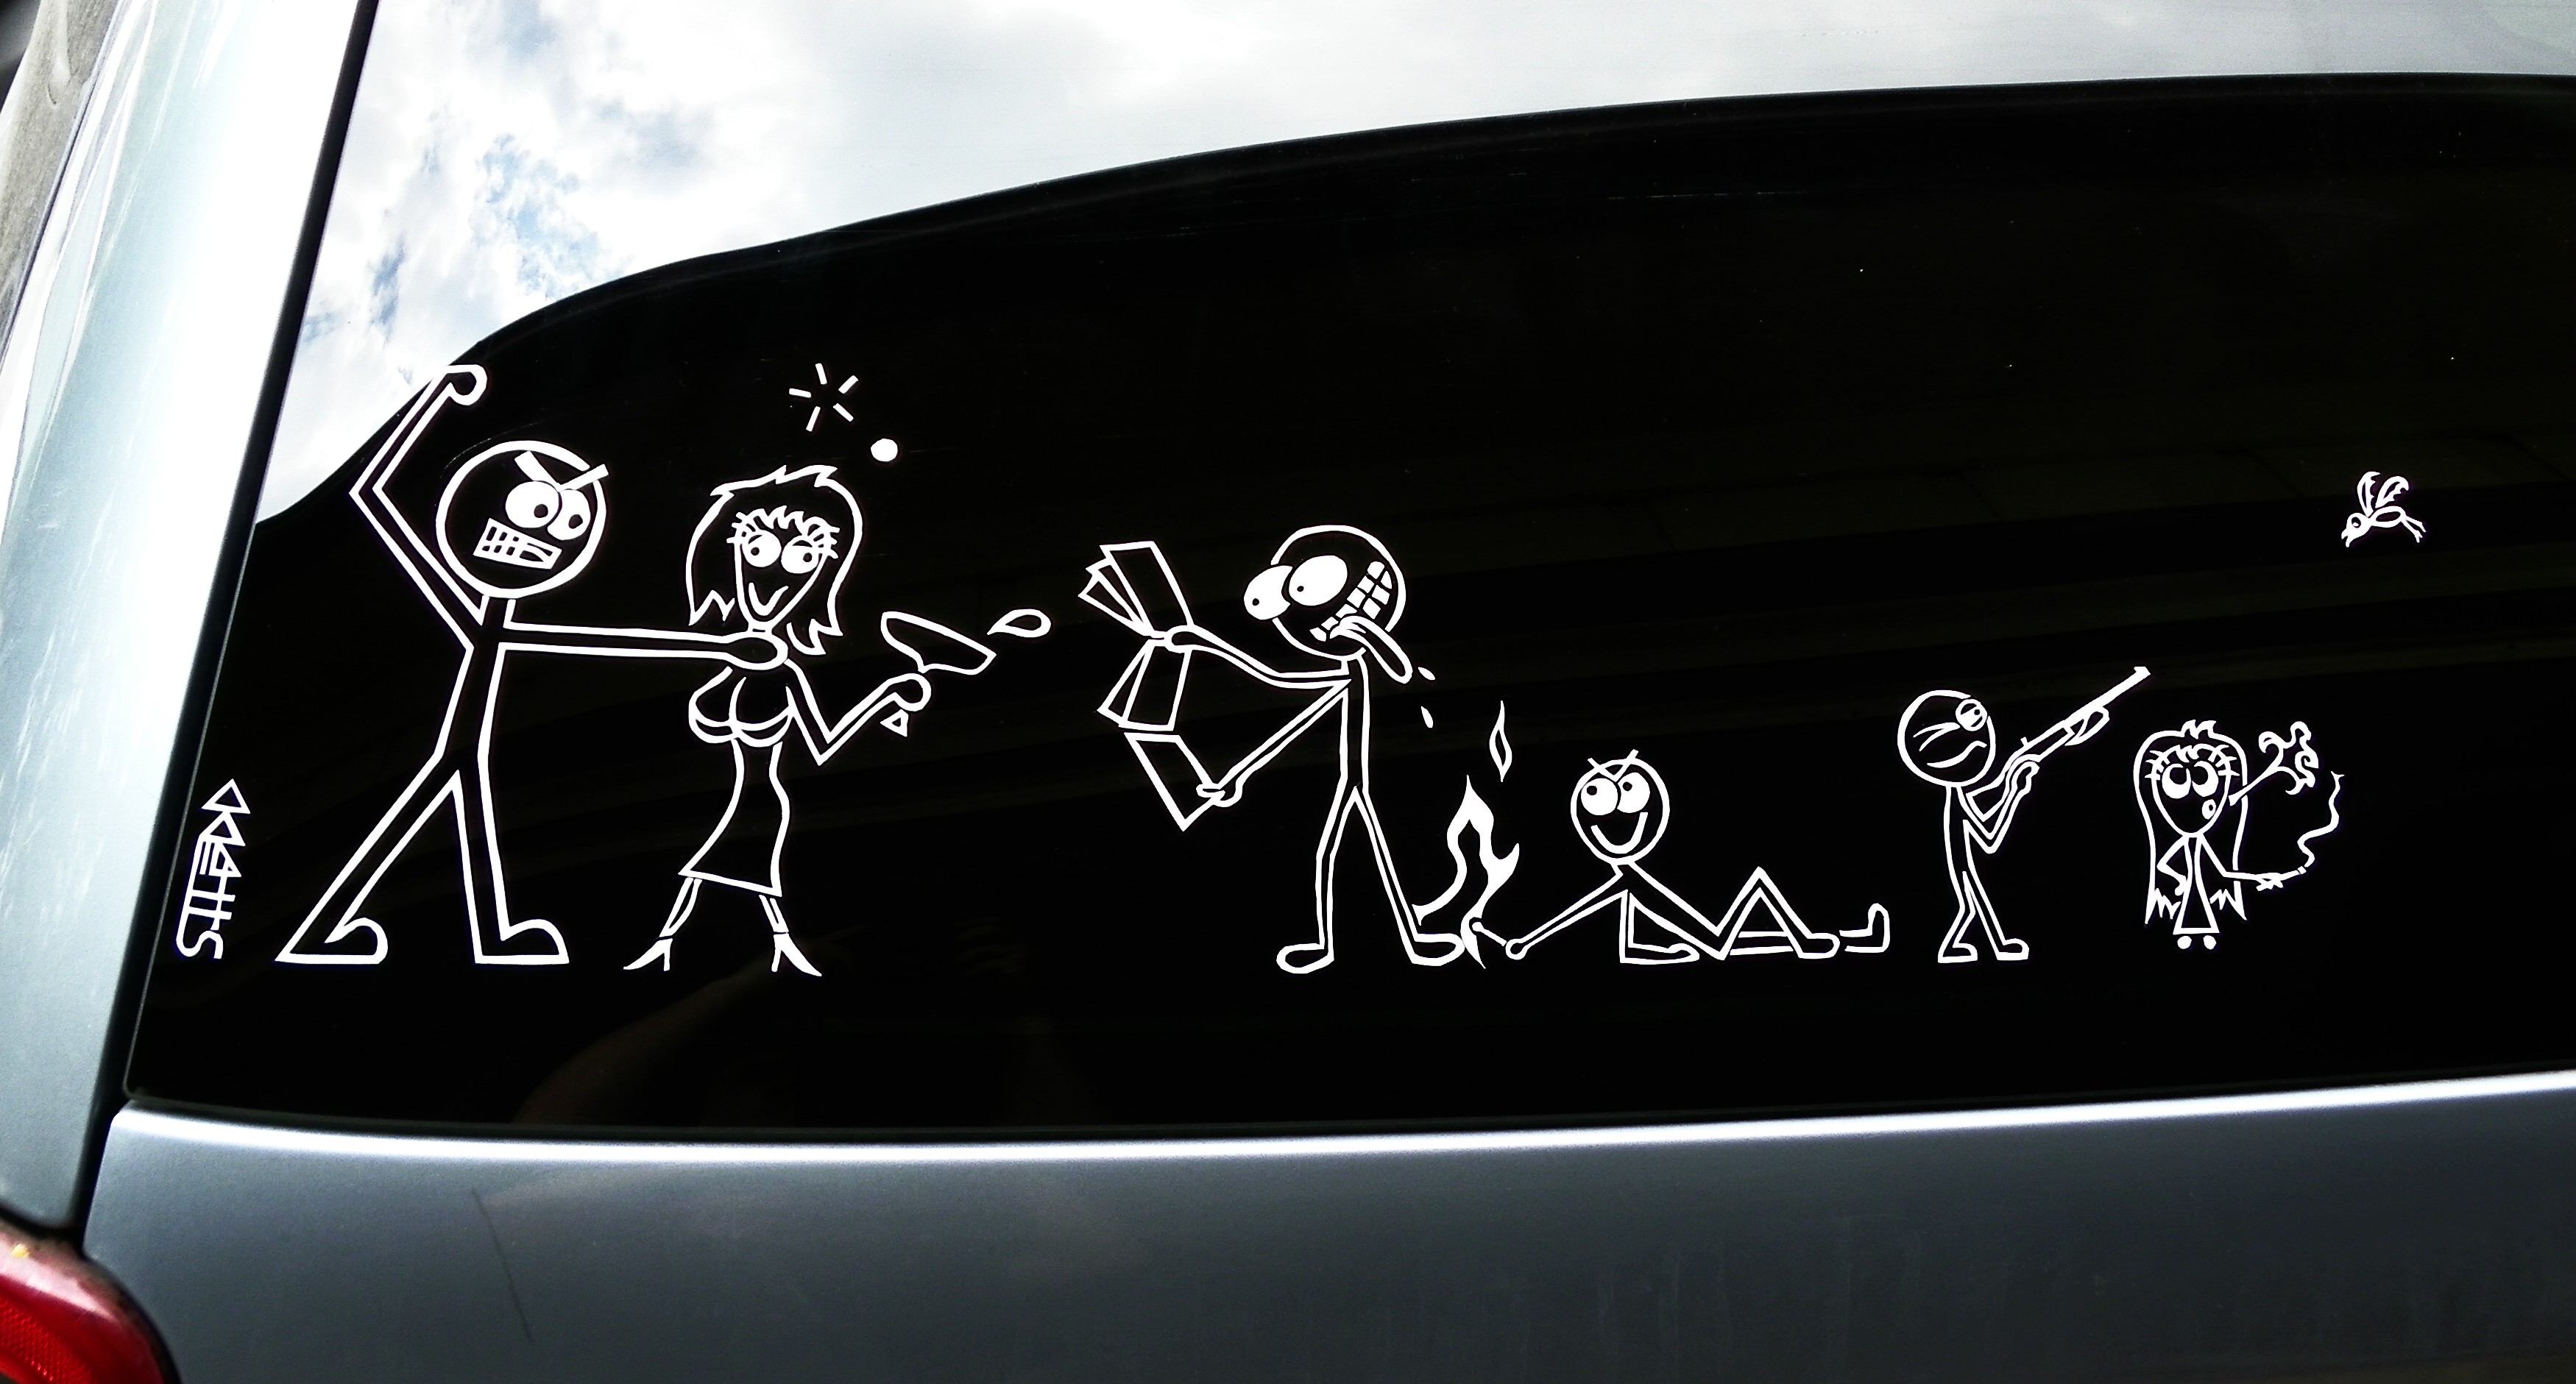 I just love how bubbly and happy all the drivers in this town have their little smiling families looking back at me from their rear windows, from happy daddy all the way down to happy baby. So I decided to make my own happy family. Enjoy!